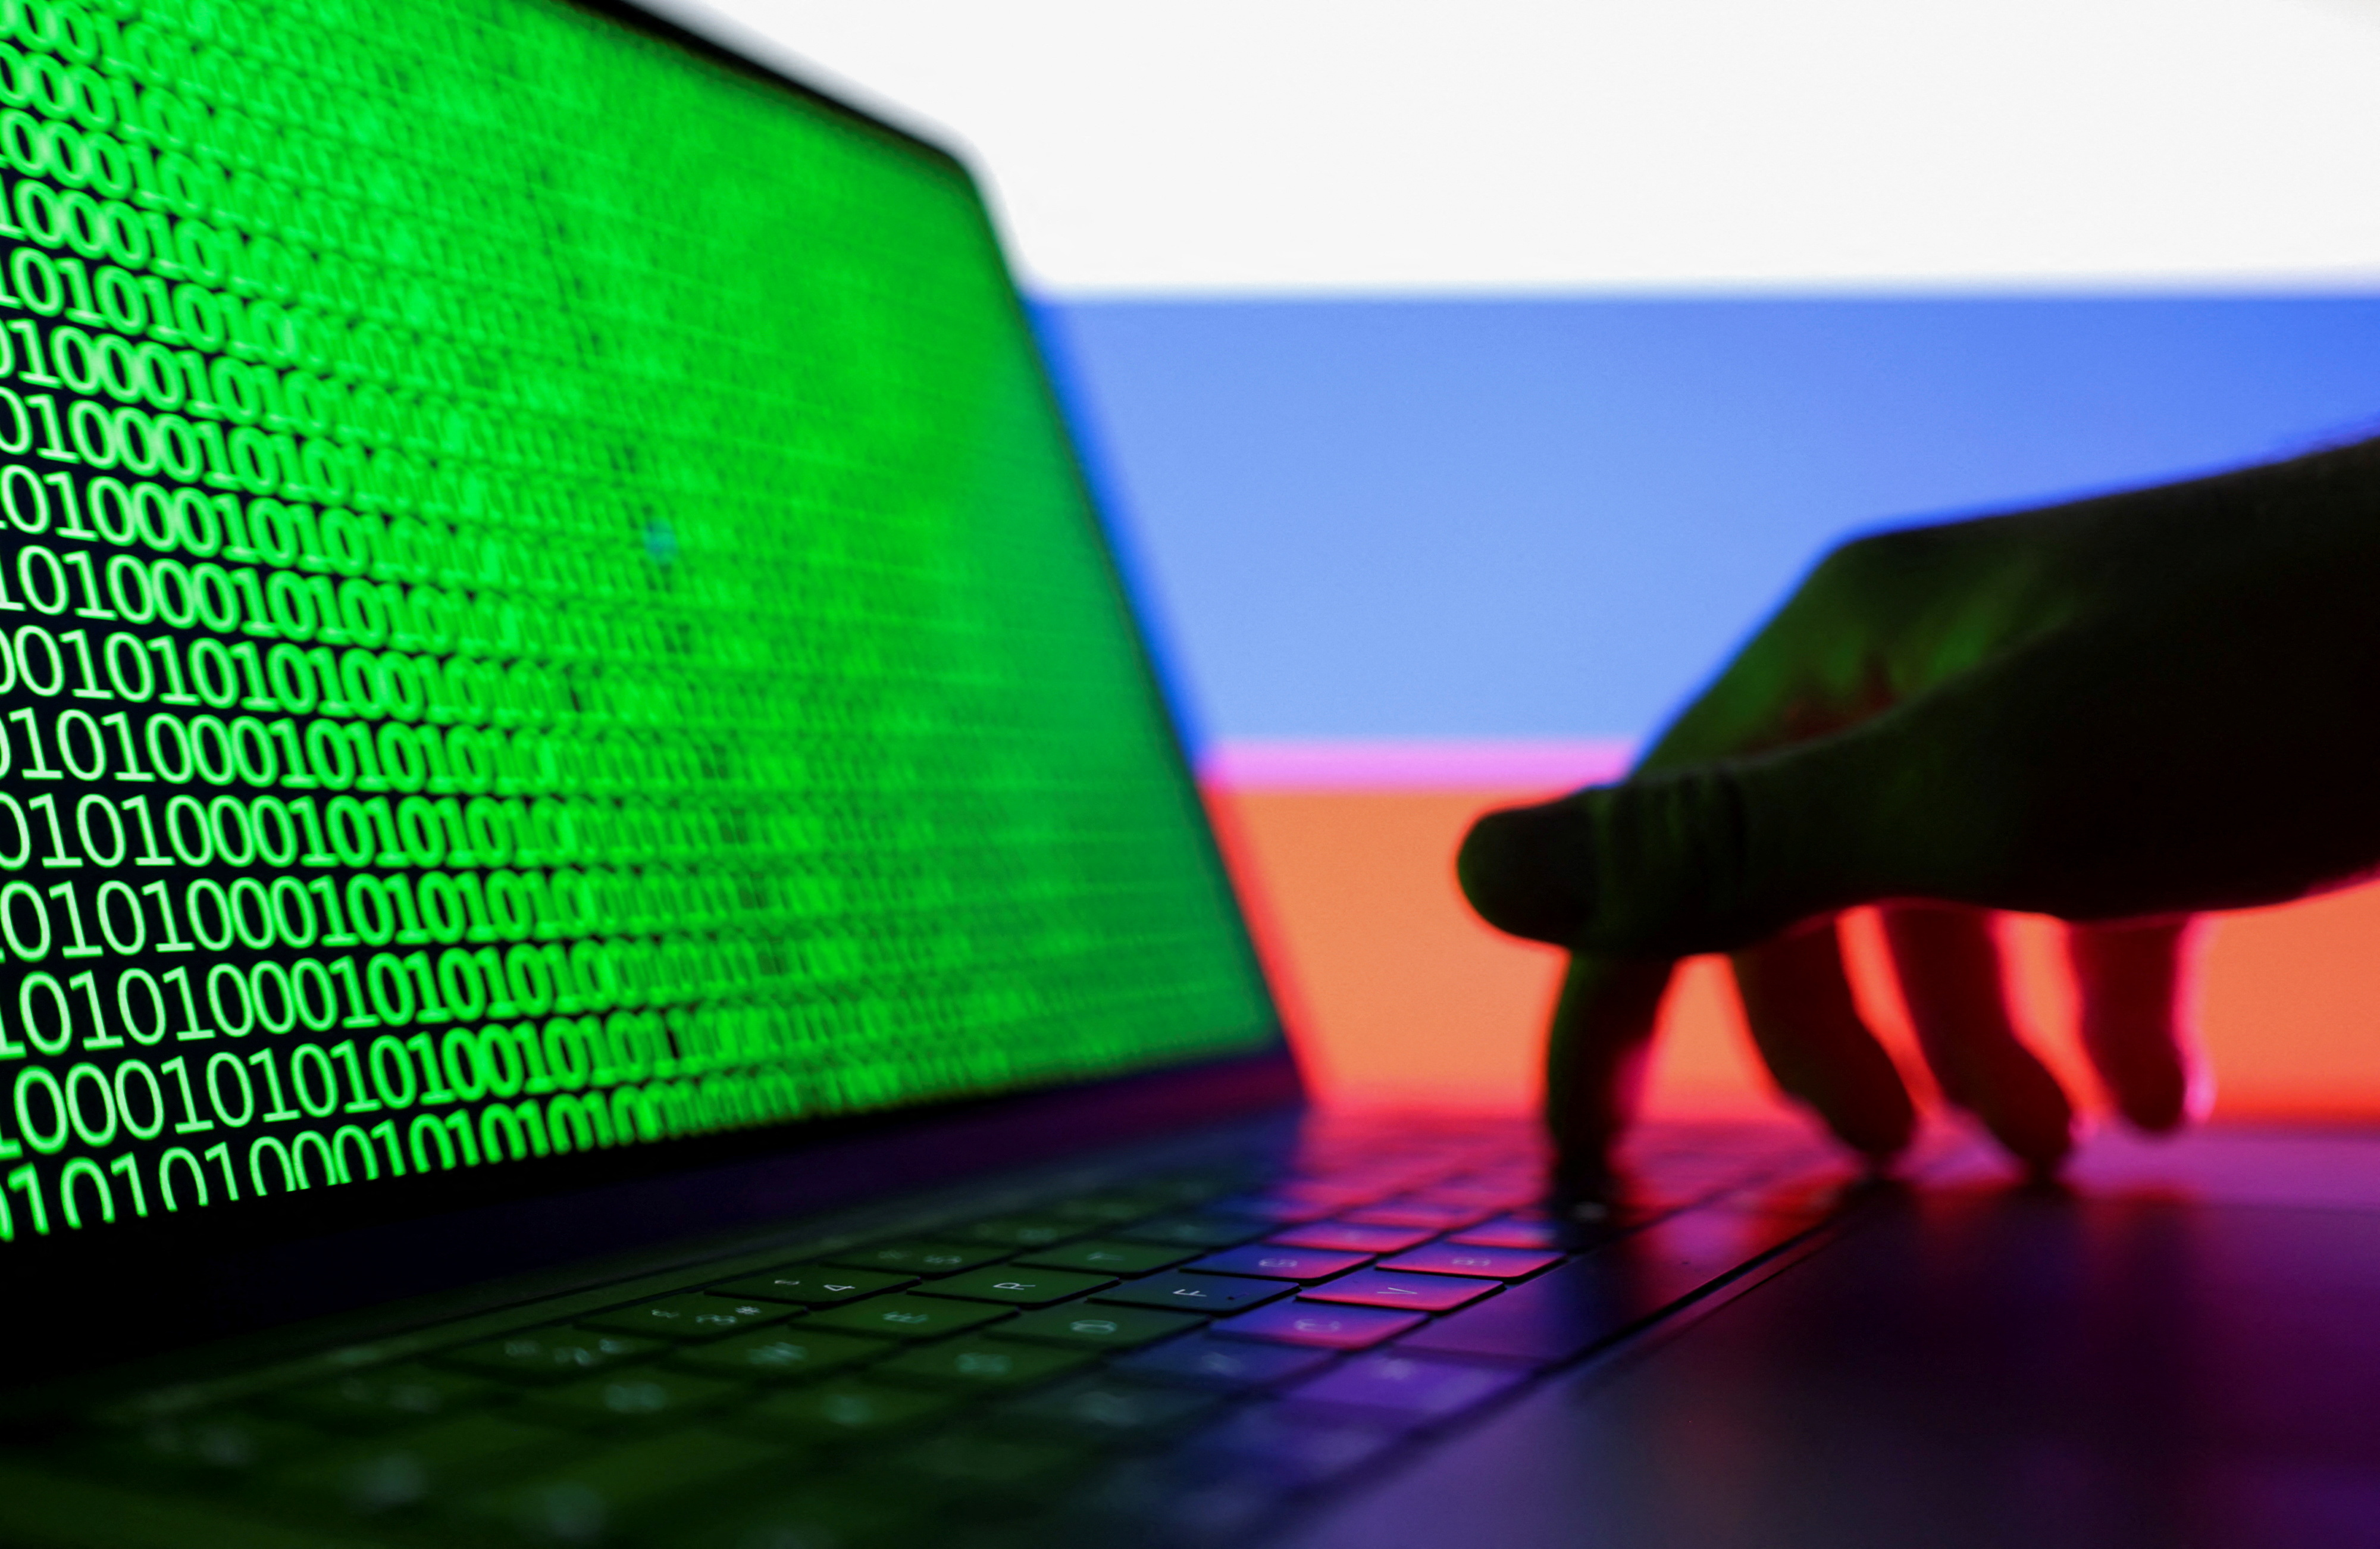 Illustration shows laptop with binary code on the screen in front of Russian flag